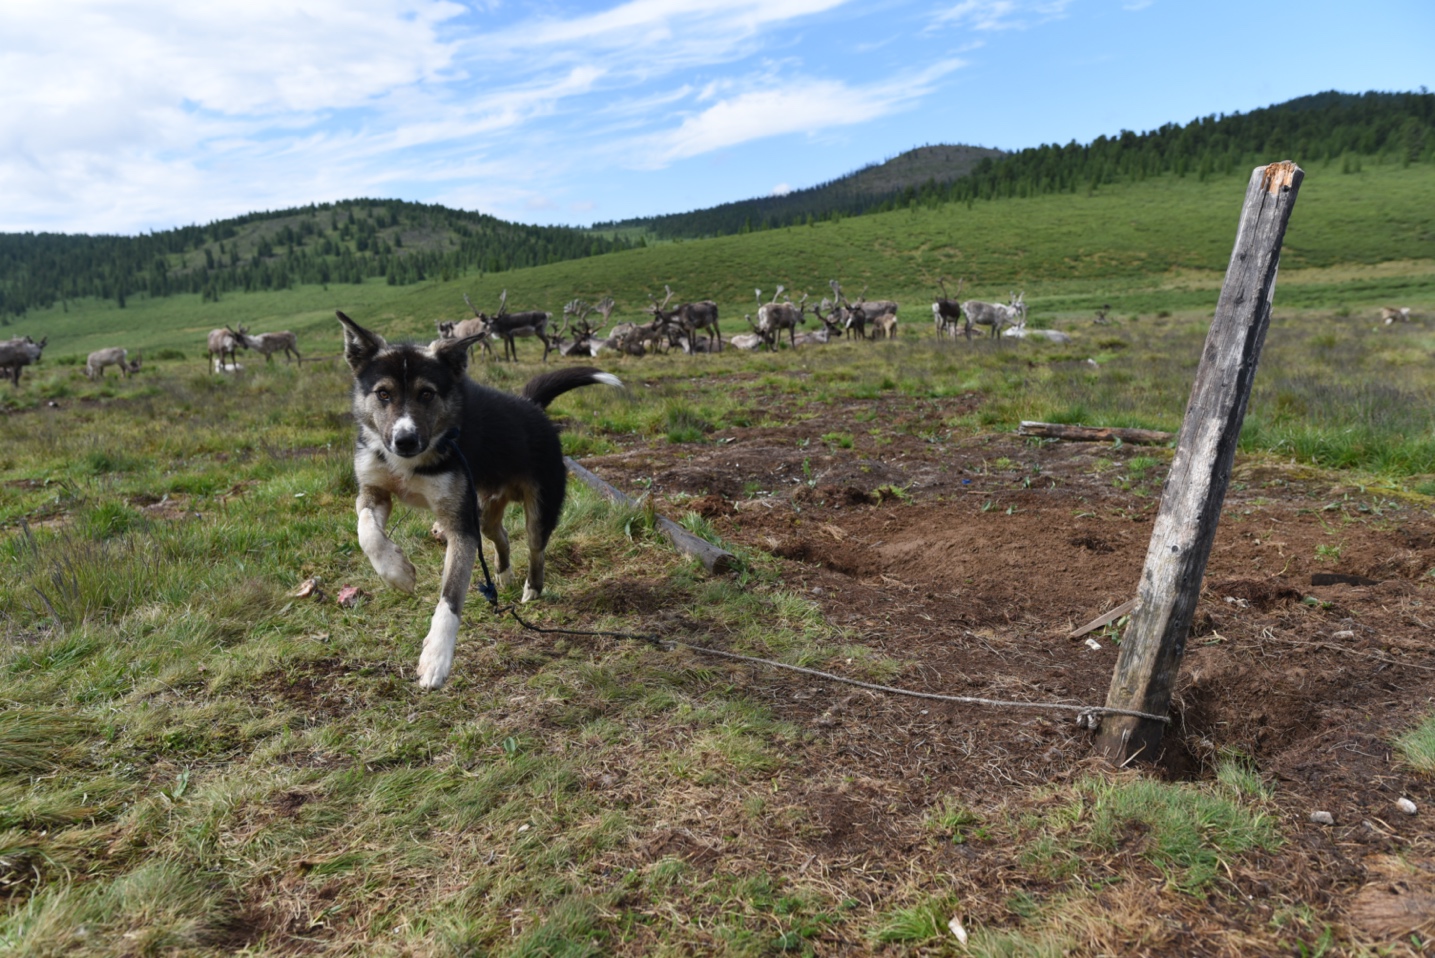 A puppy leashed to a wooden post runs toward the camera, in the background, a herd of reindeer graze in front of distant green hills.